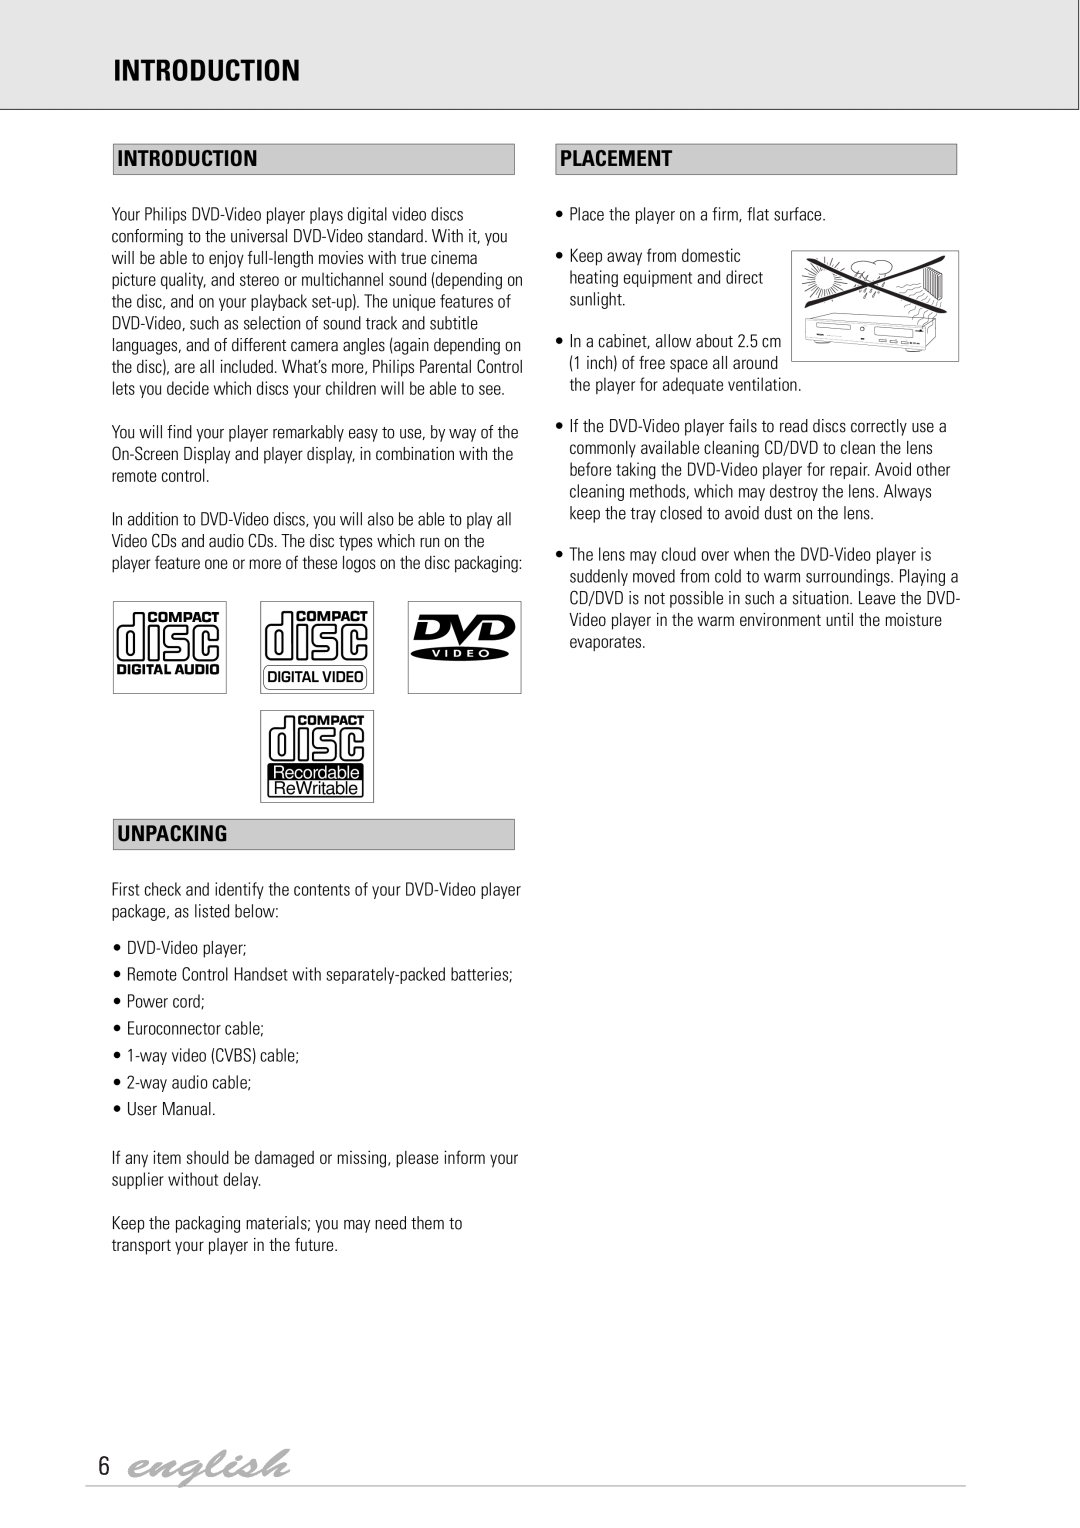 Dolby Laboratories DVD Video manual english, Introduction, Placement, Unpacking 